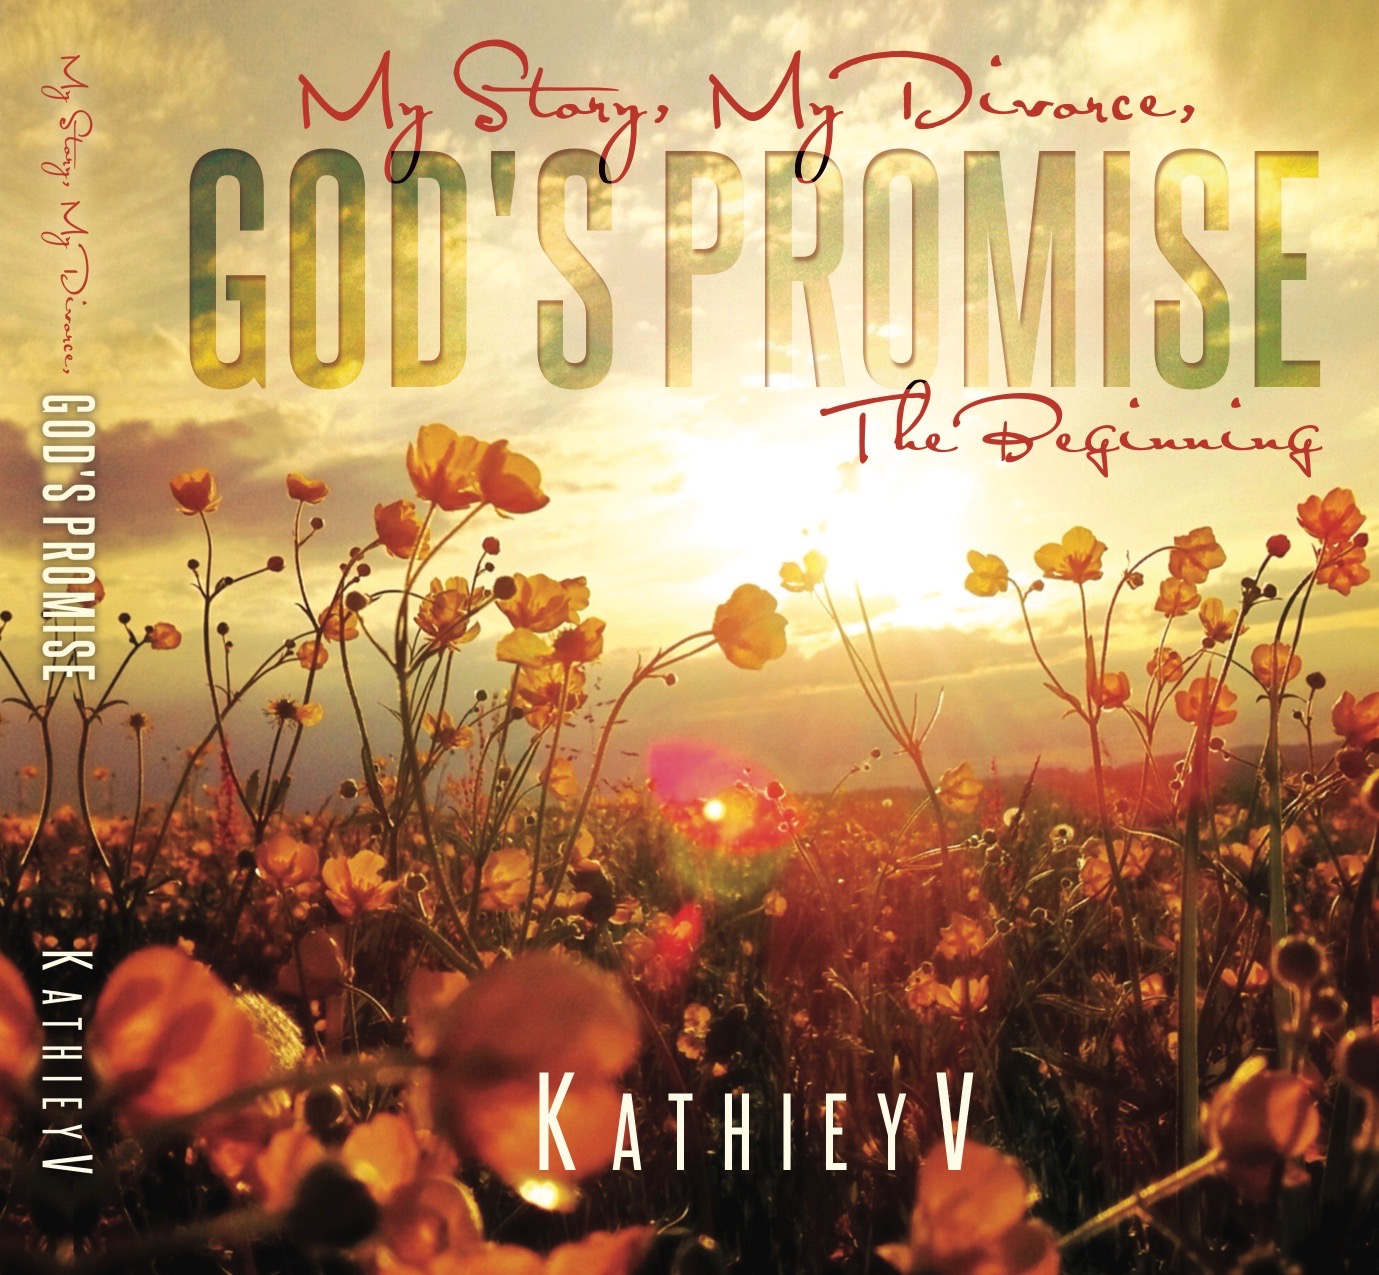 My Story My Divorce God's Promise, The Beginning